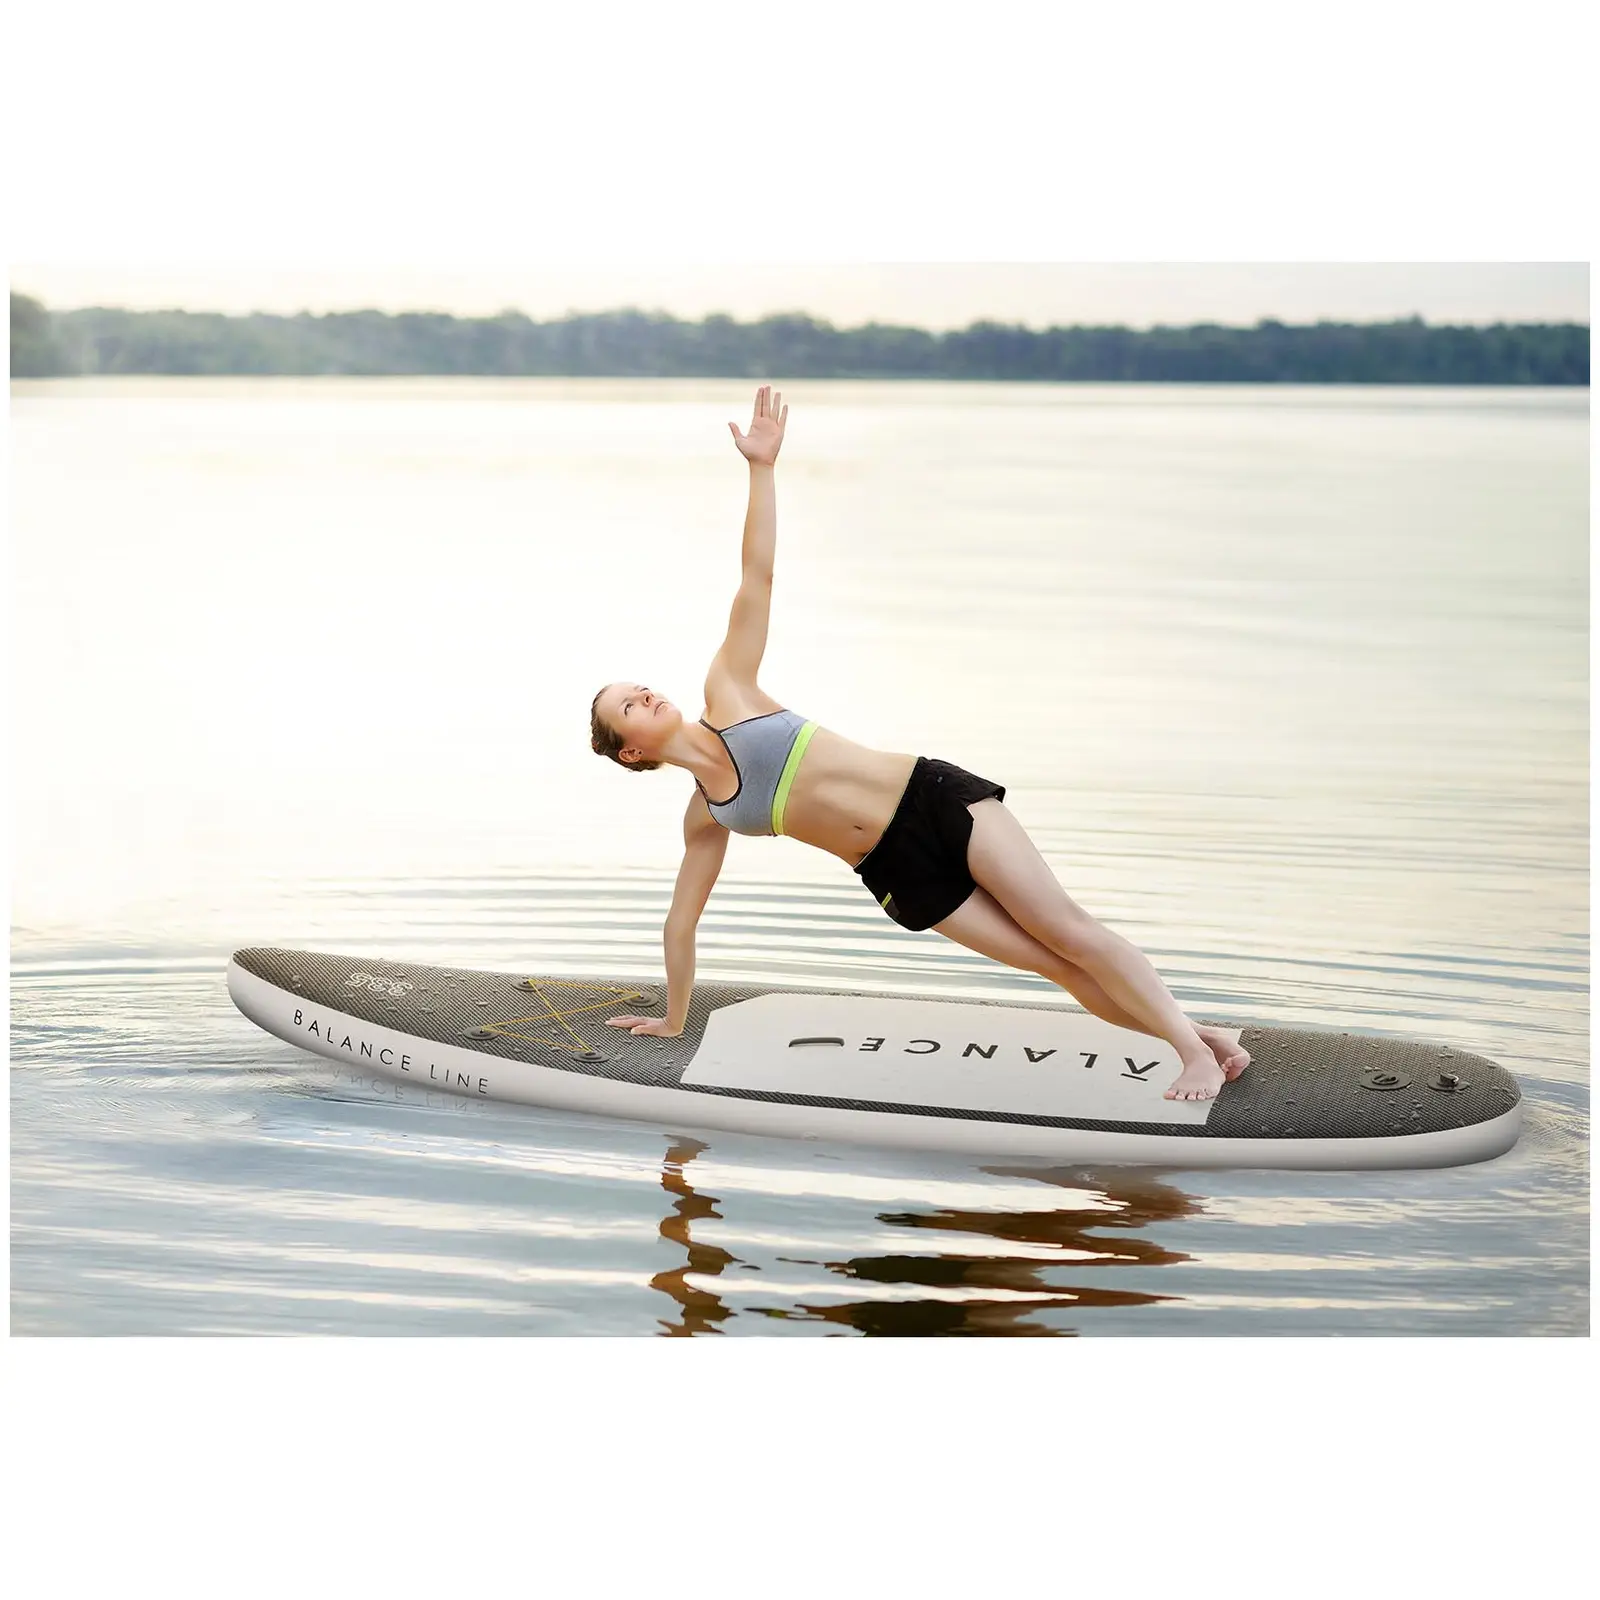 Stand up paddle gonflable - 145 kg - 335 x 71 x 15 cm